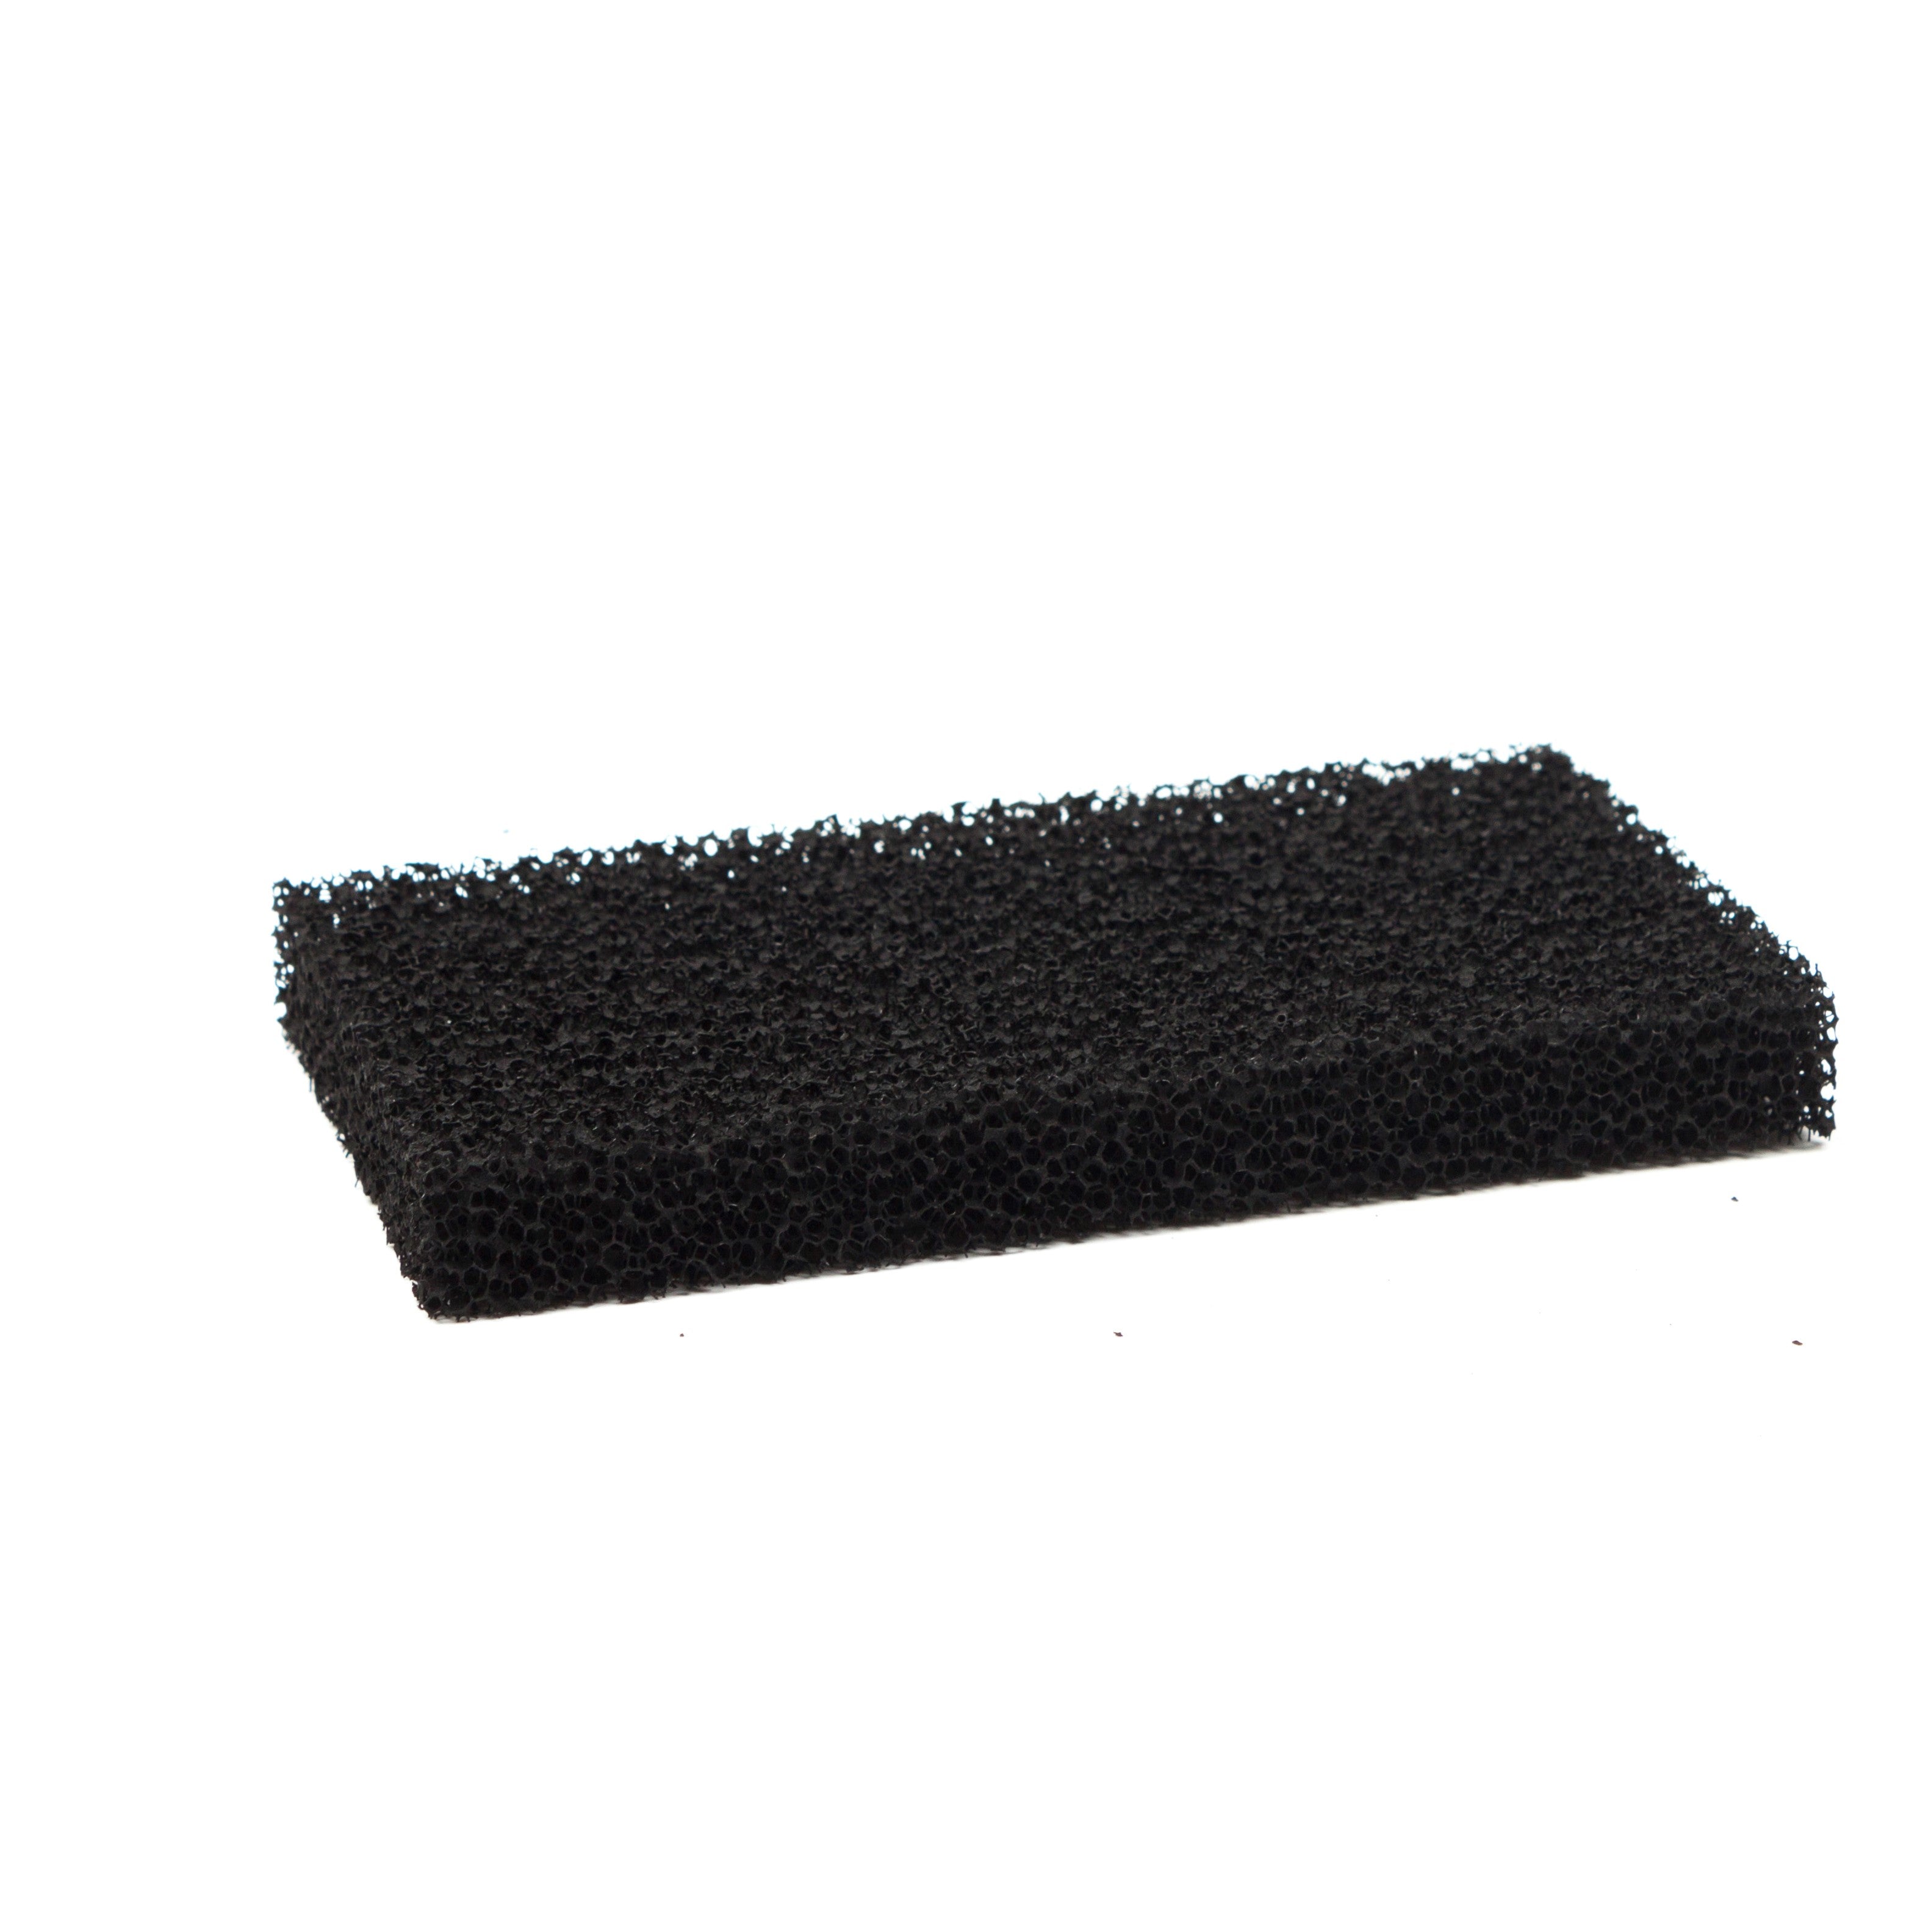 LTWHOME Compatible Carbon Foam Filters Suitable for Interpet Pf3 Internal Filter(Pack of 200)